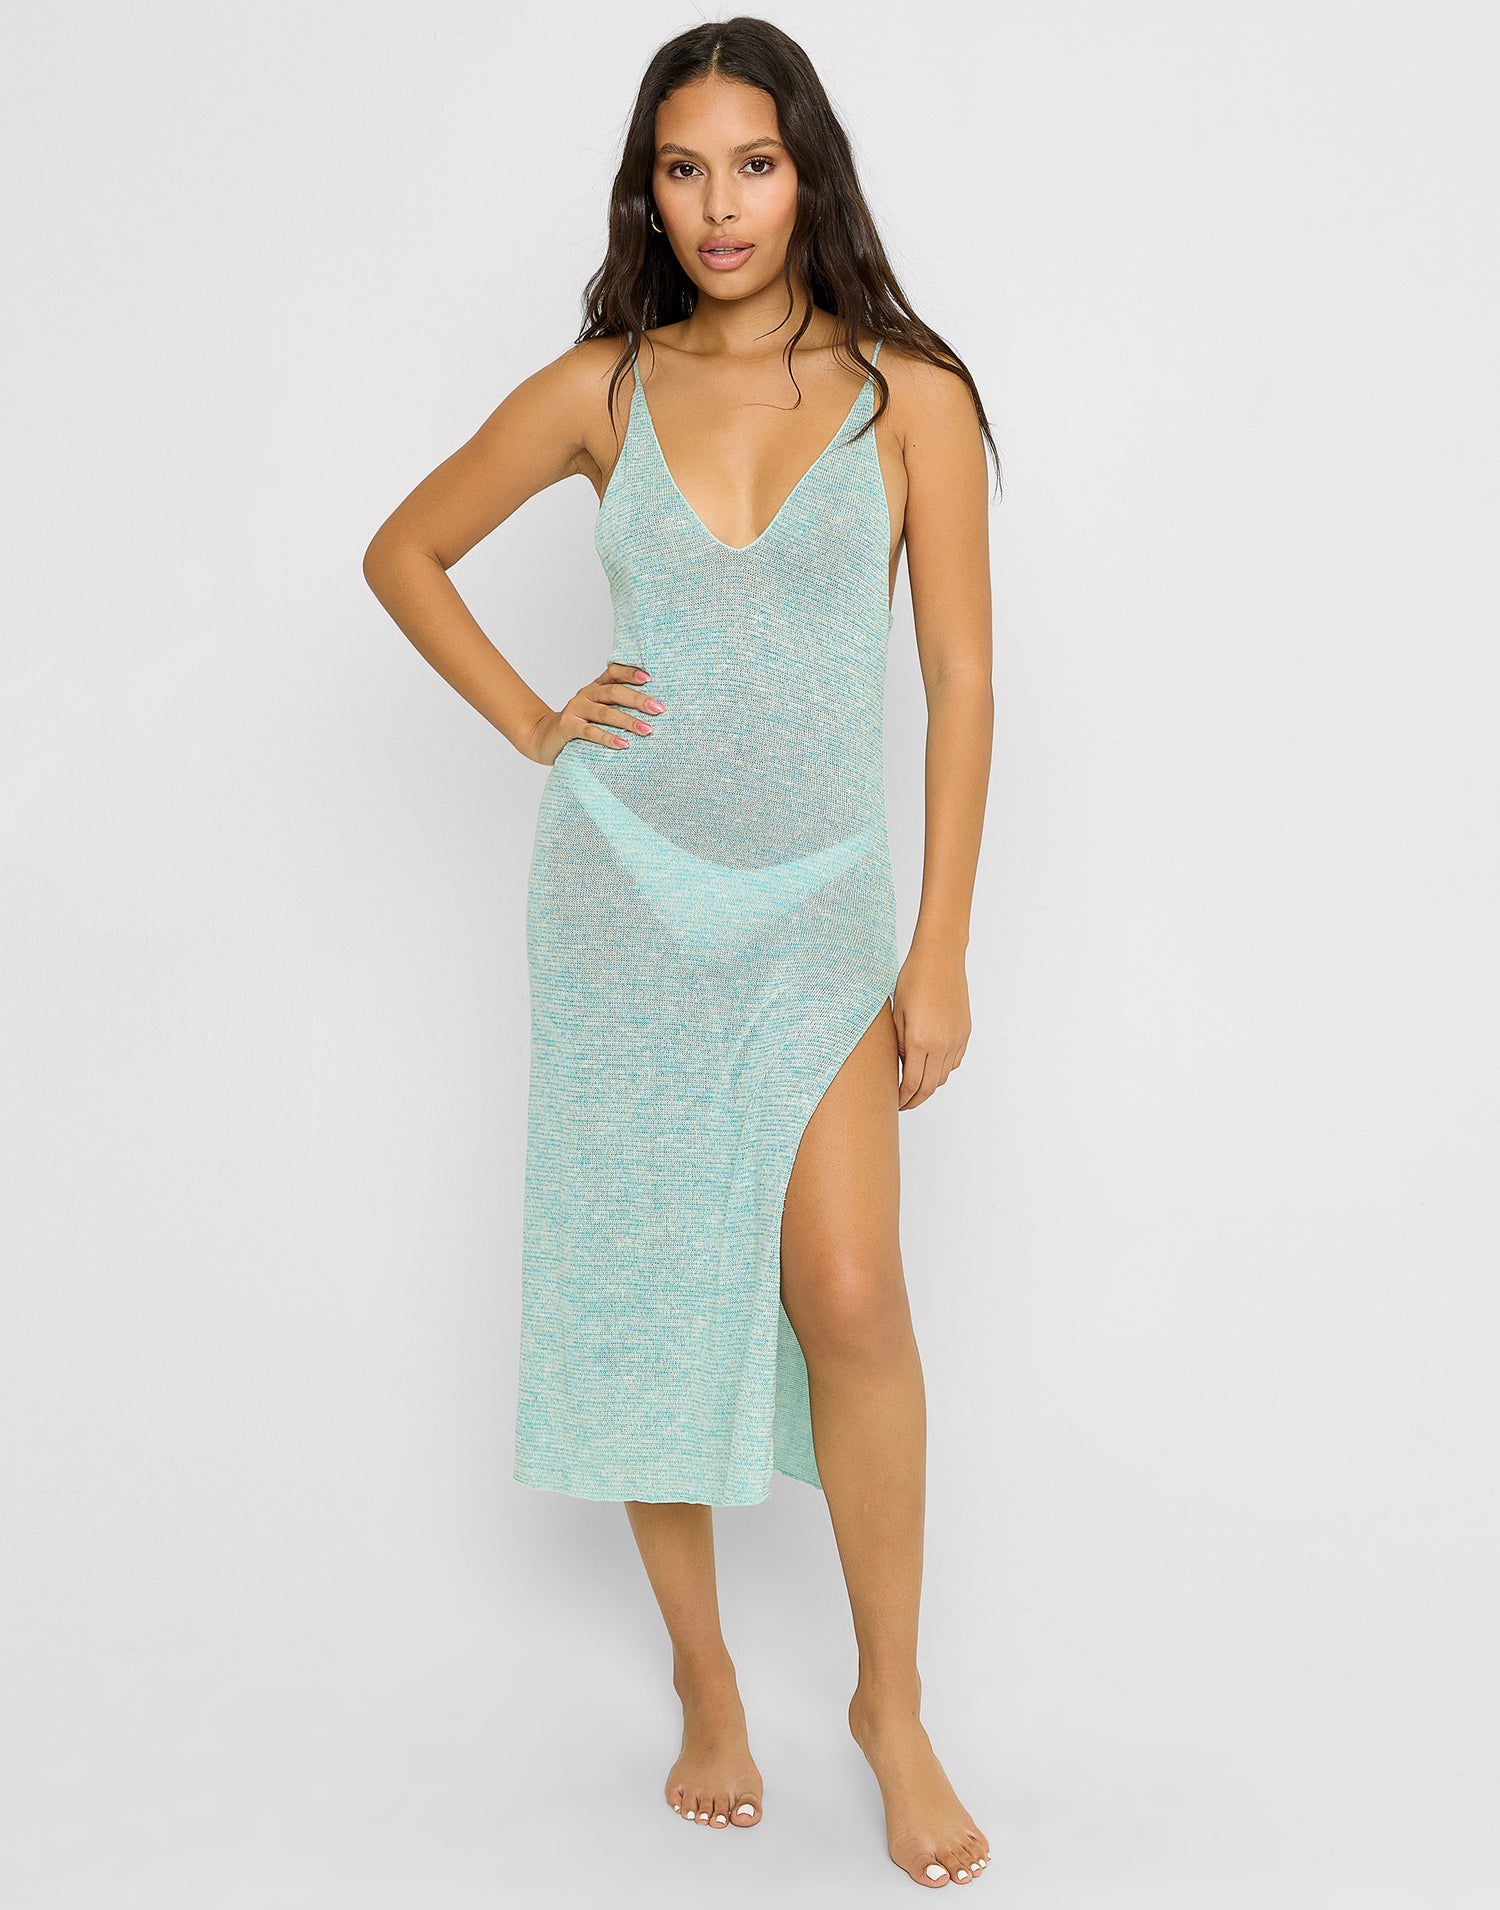 Golden Girl Maxi Dress Cover Up in Aqua with High Leg Slit - Front View